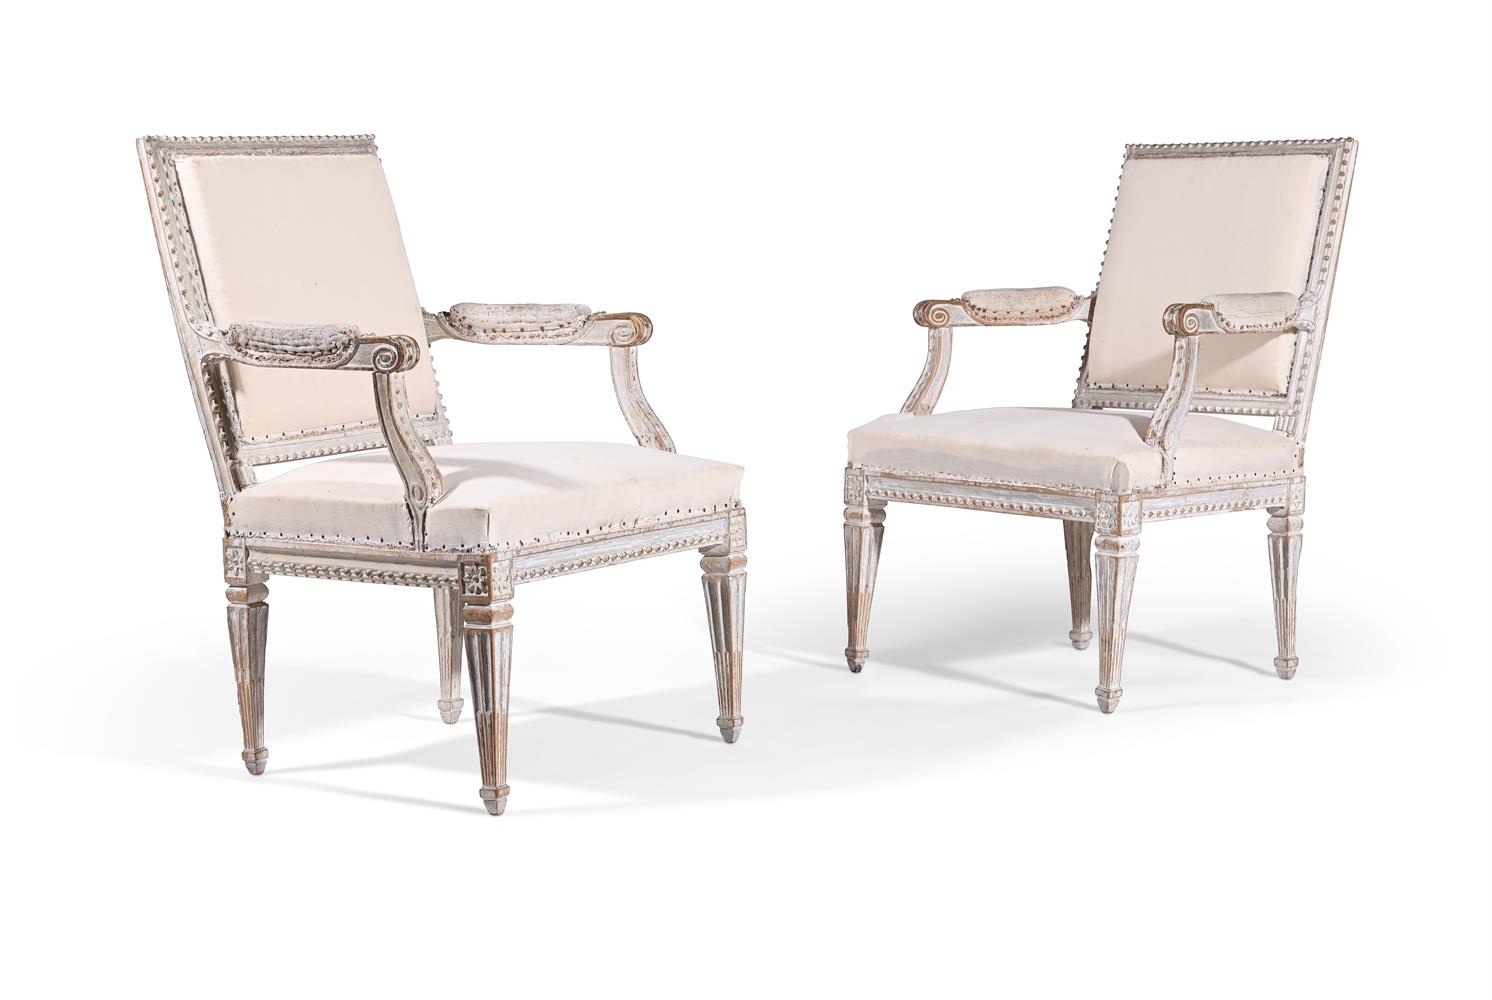 A PAIR OF LOUIS XVI PAINTED BEECH AND UPHOLSTERED FAUTEUILS, LATE 18TH CENTURY